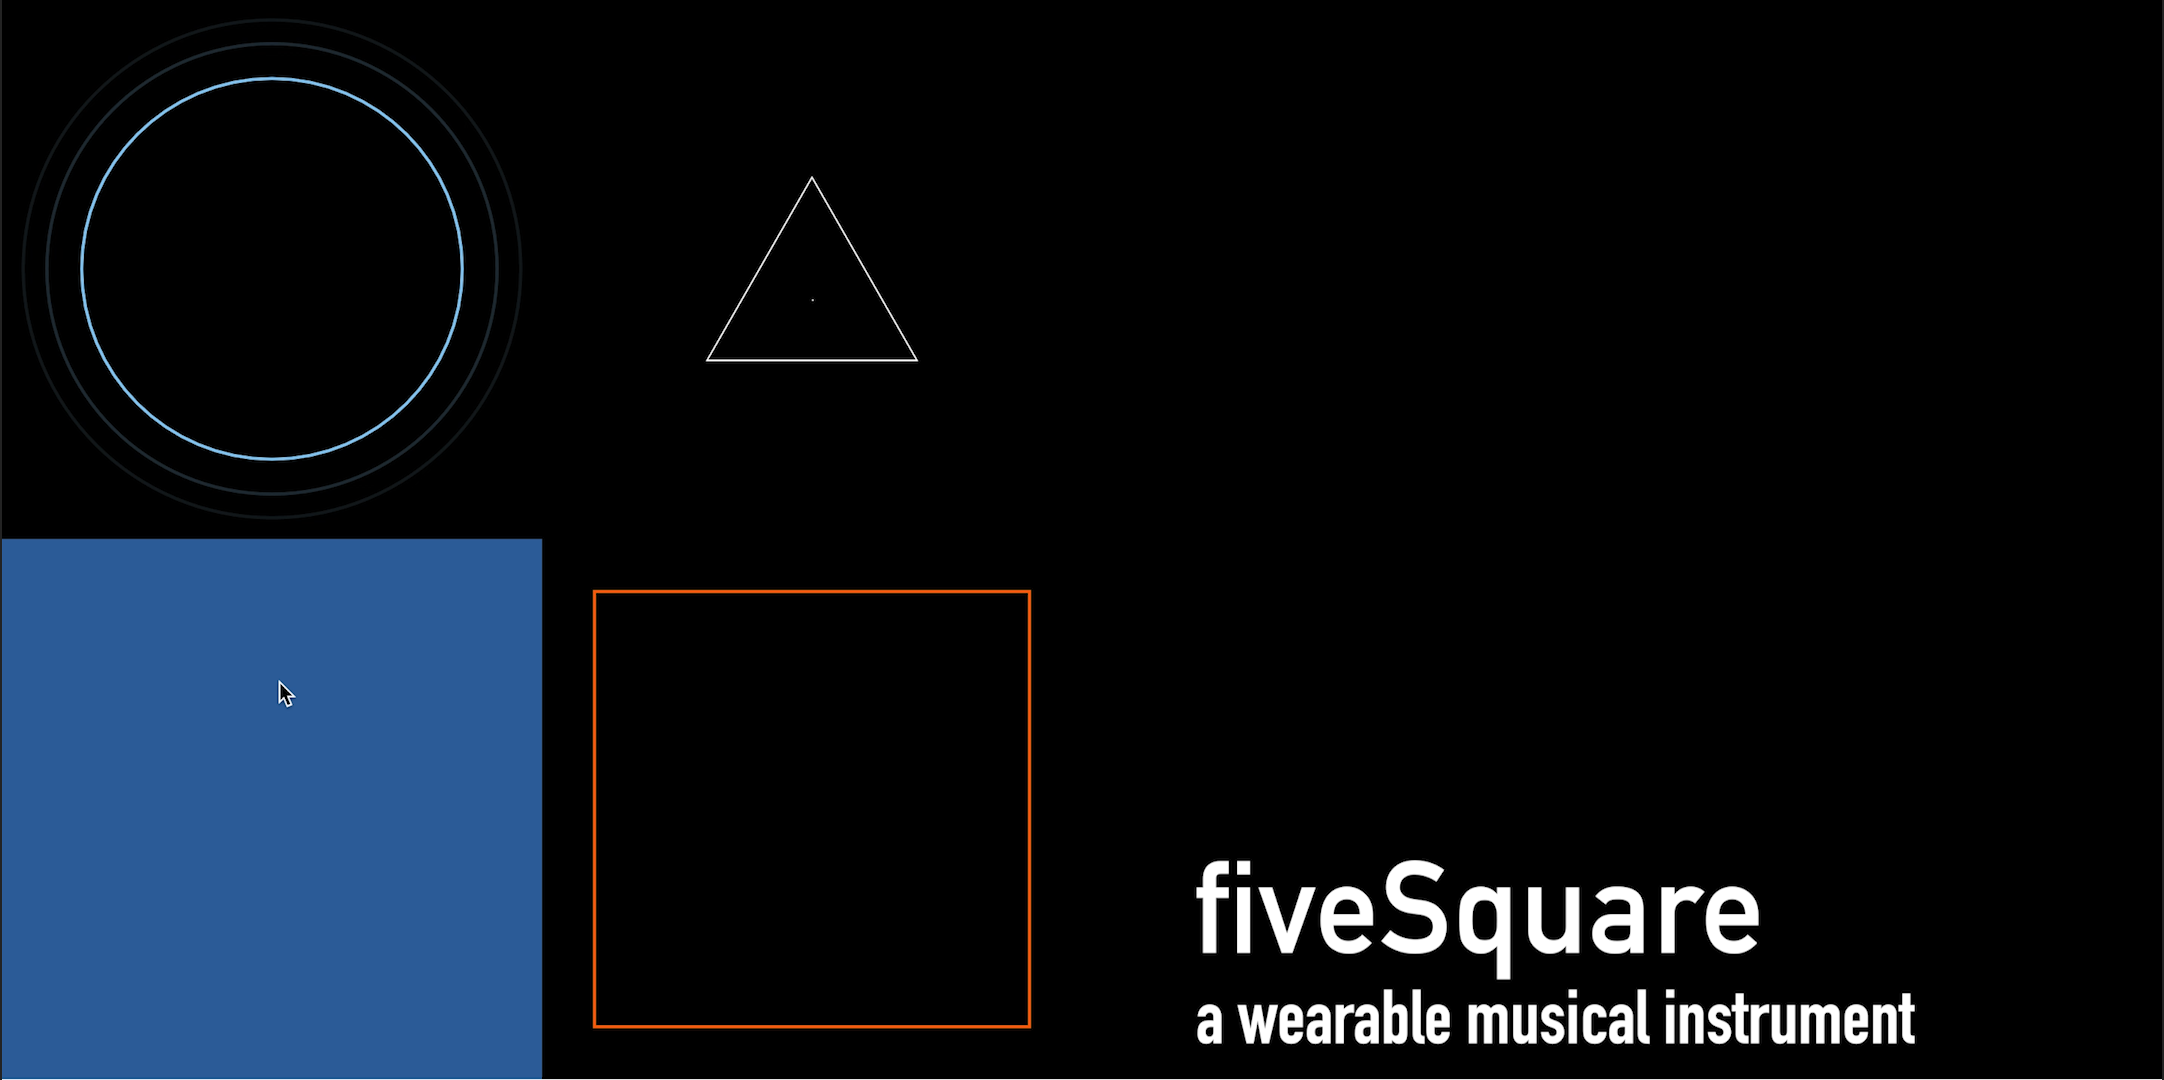 Beautiful music and hypnotic animation are at your fingertips. With fiveSquare, if you can bend your fingers, you can play a song!